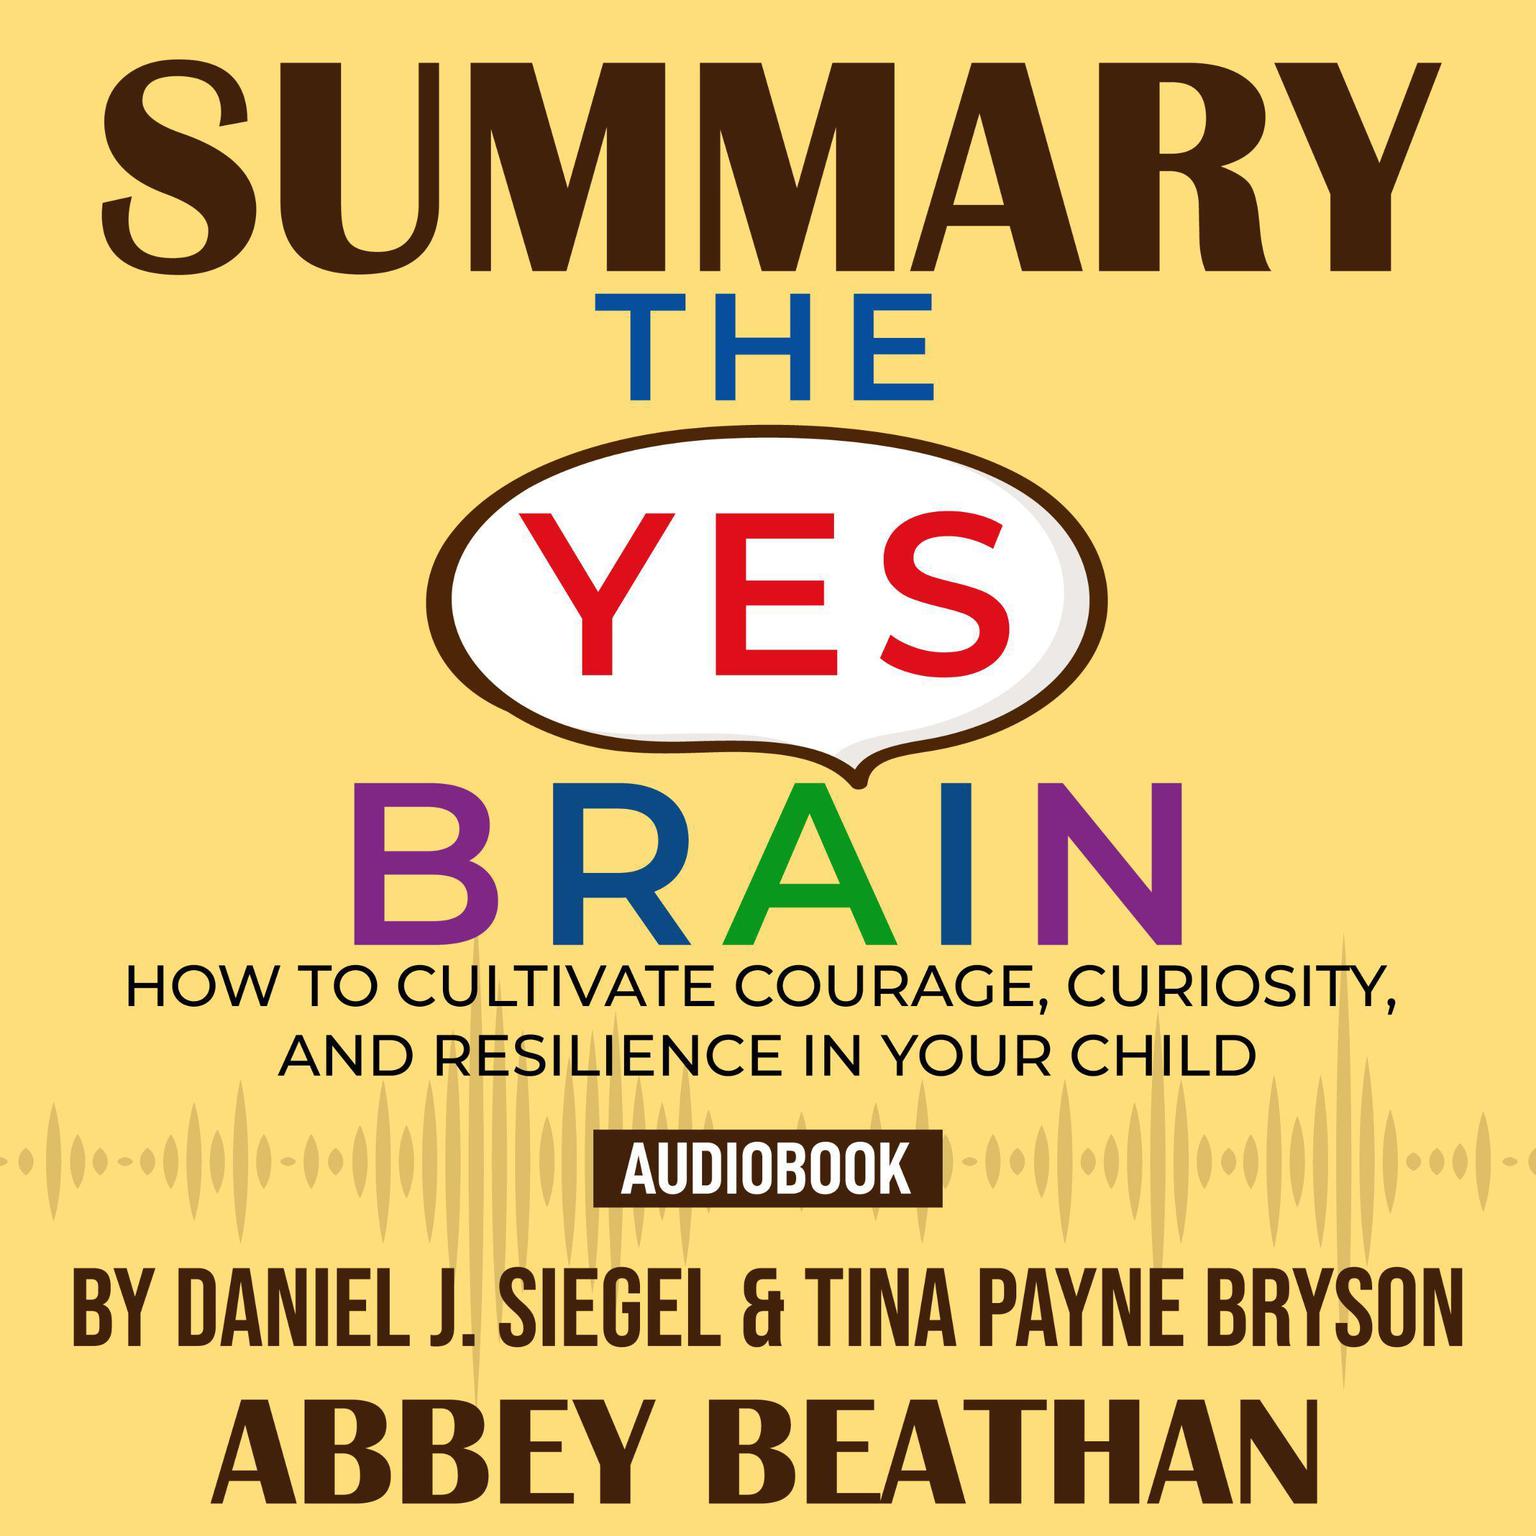 Summary of The Yes Brain: How to Cultivate Courage, Curiosity, and Resilience in Your Child by Daniel J. Siegel & Tina Payne Bryson Audiobook, by Abbey Beathan